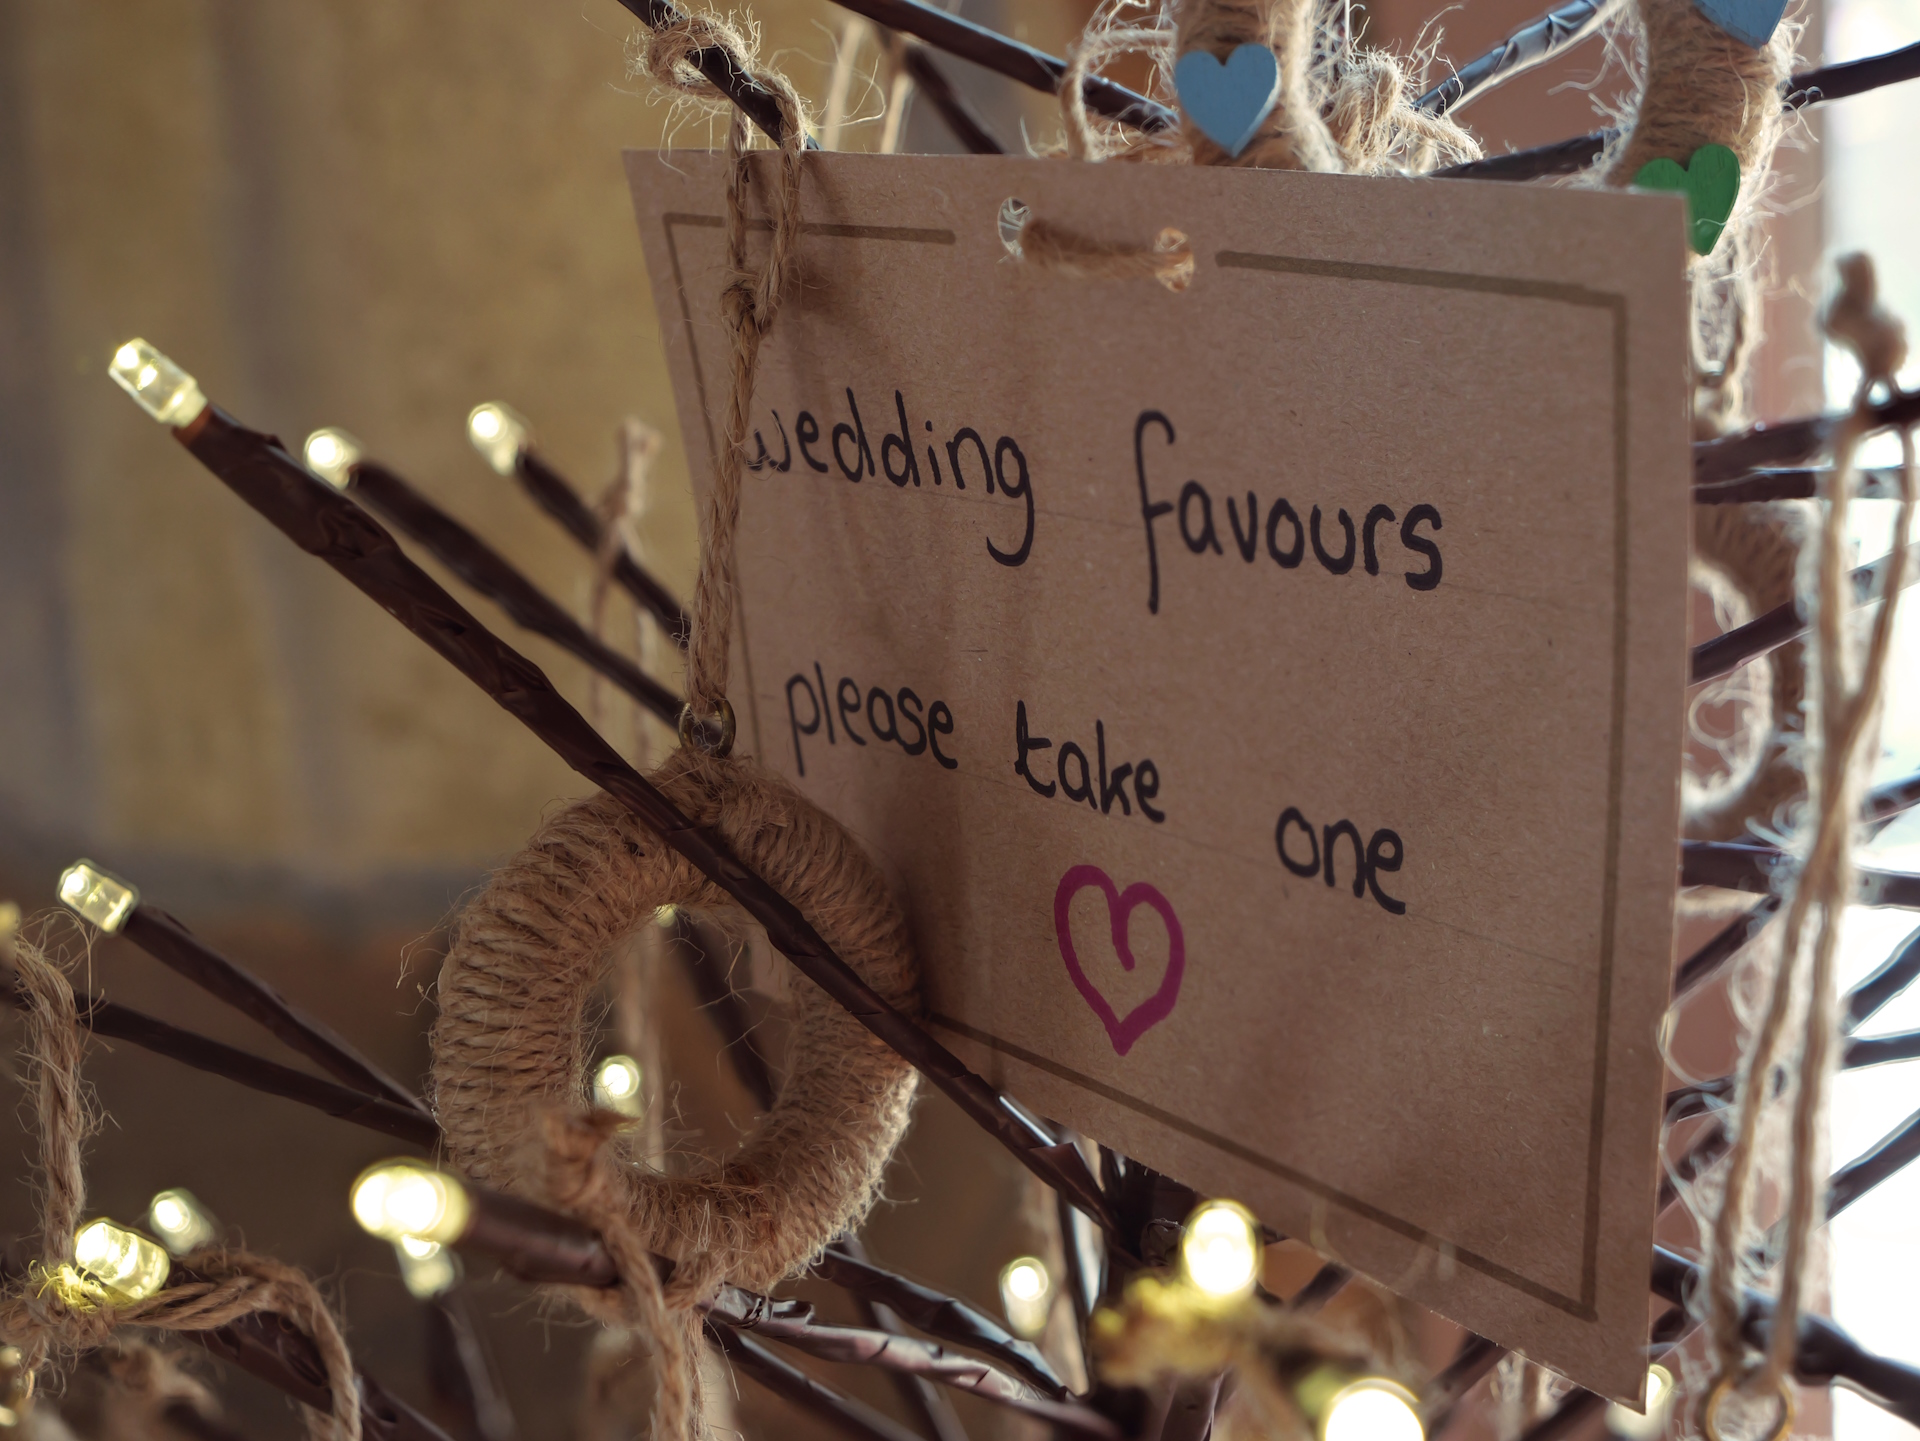 Favours for the wedding guests!